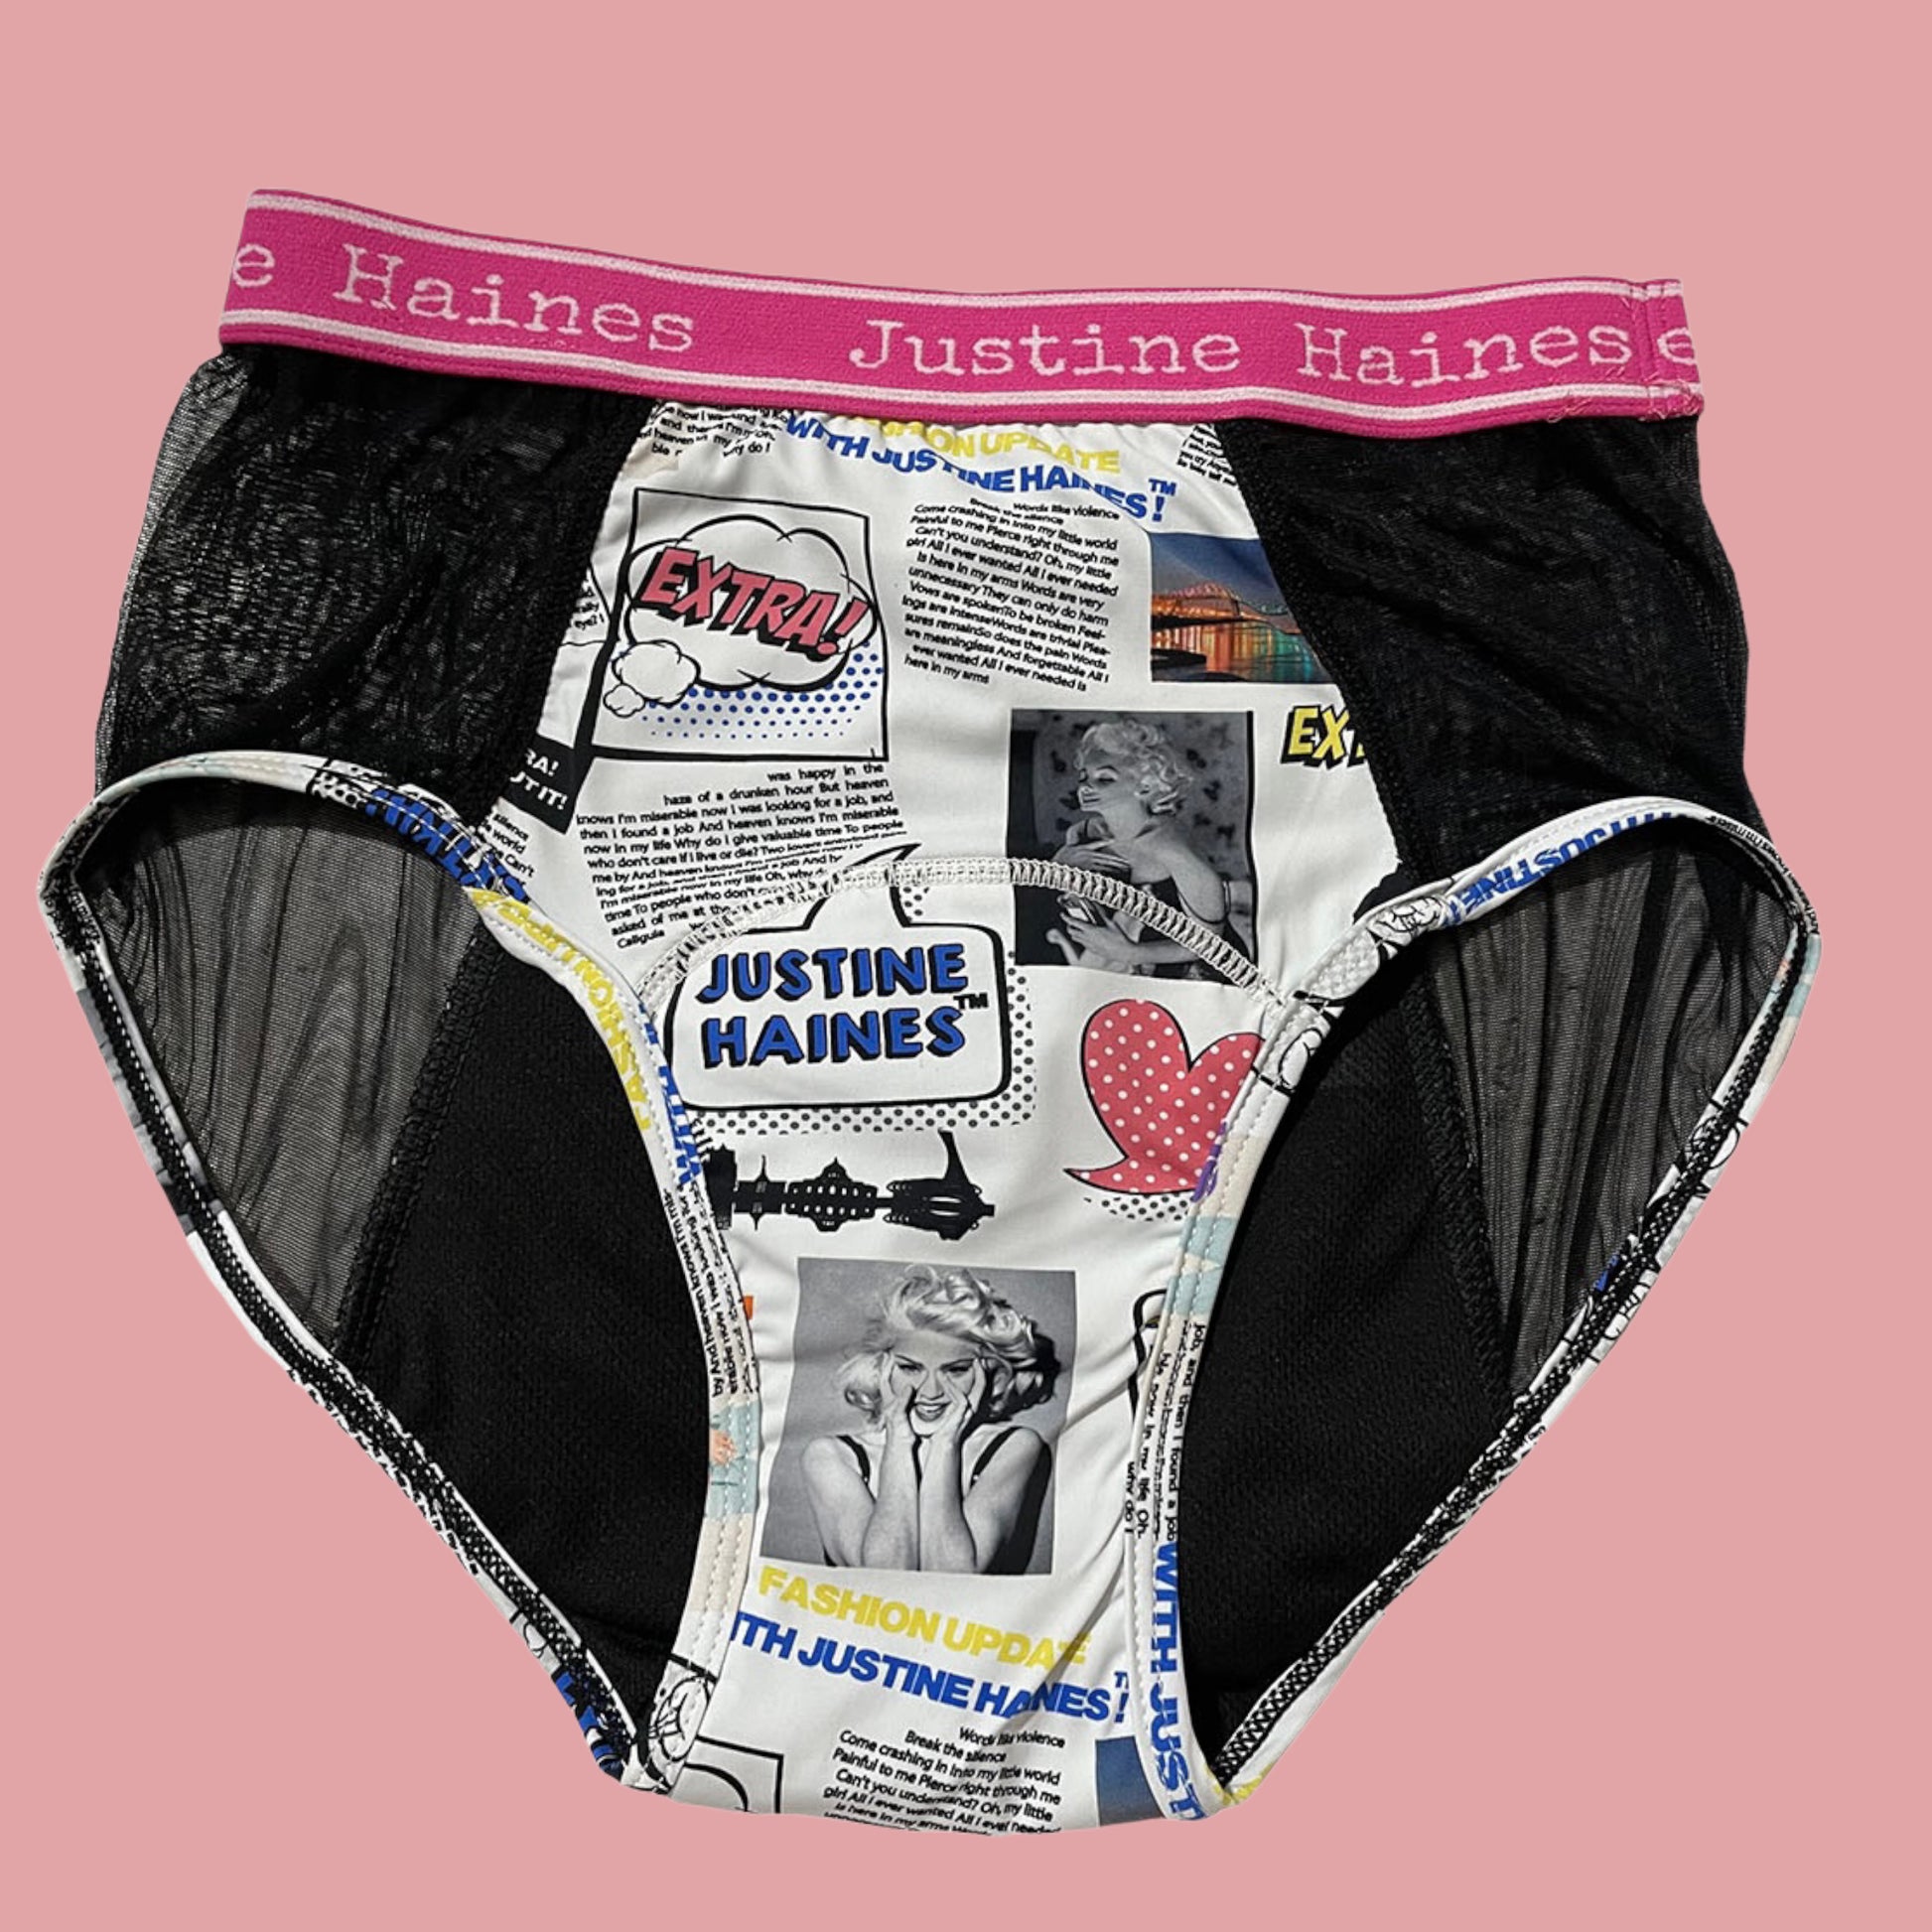 https://www.justinehaines.com/products/highrise-briefs-with-side-peek-a-boo-see-through-mesh-in-fashion-newspaper-print